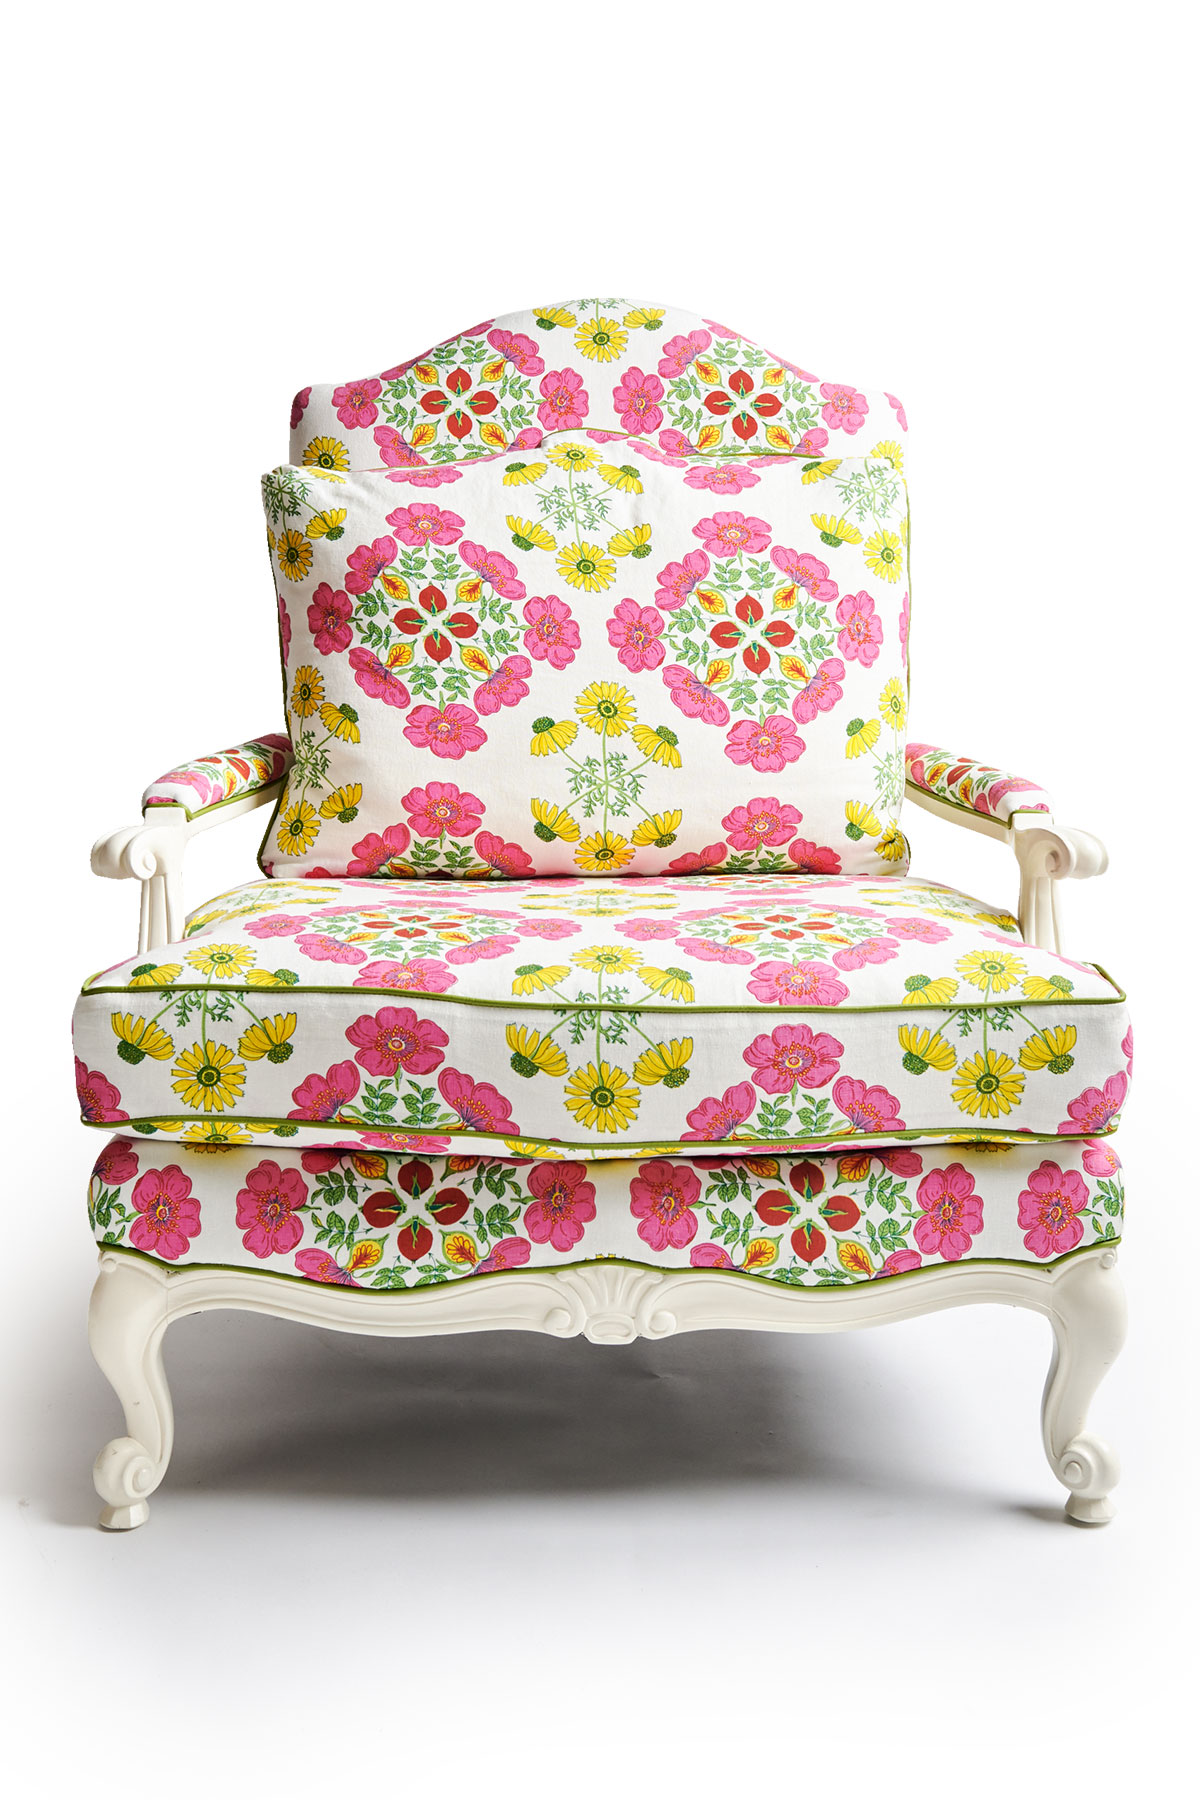 Chinoiserie Floral Chair, Three Piece Set from Dunbar Road